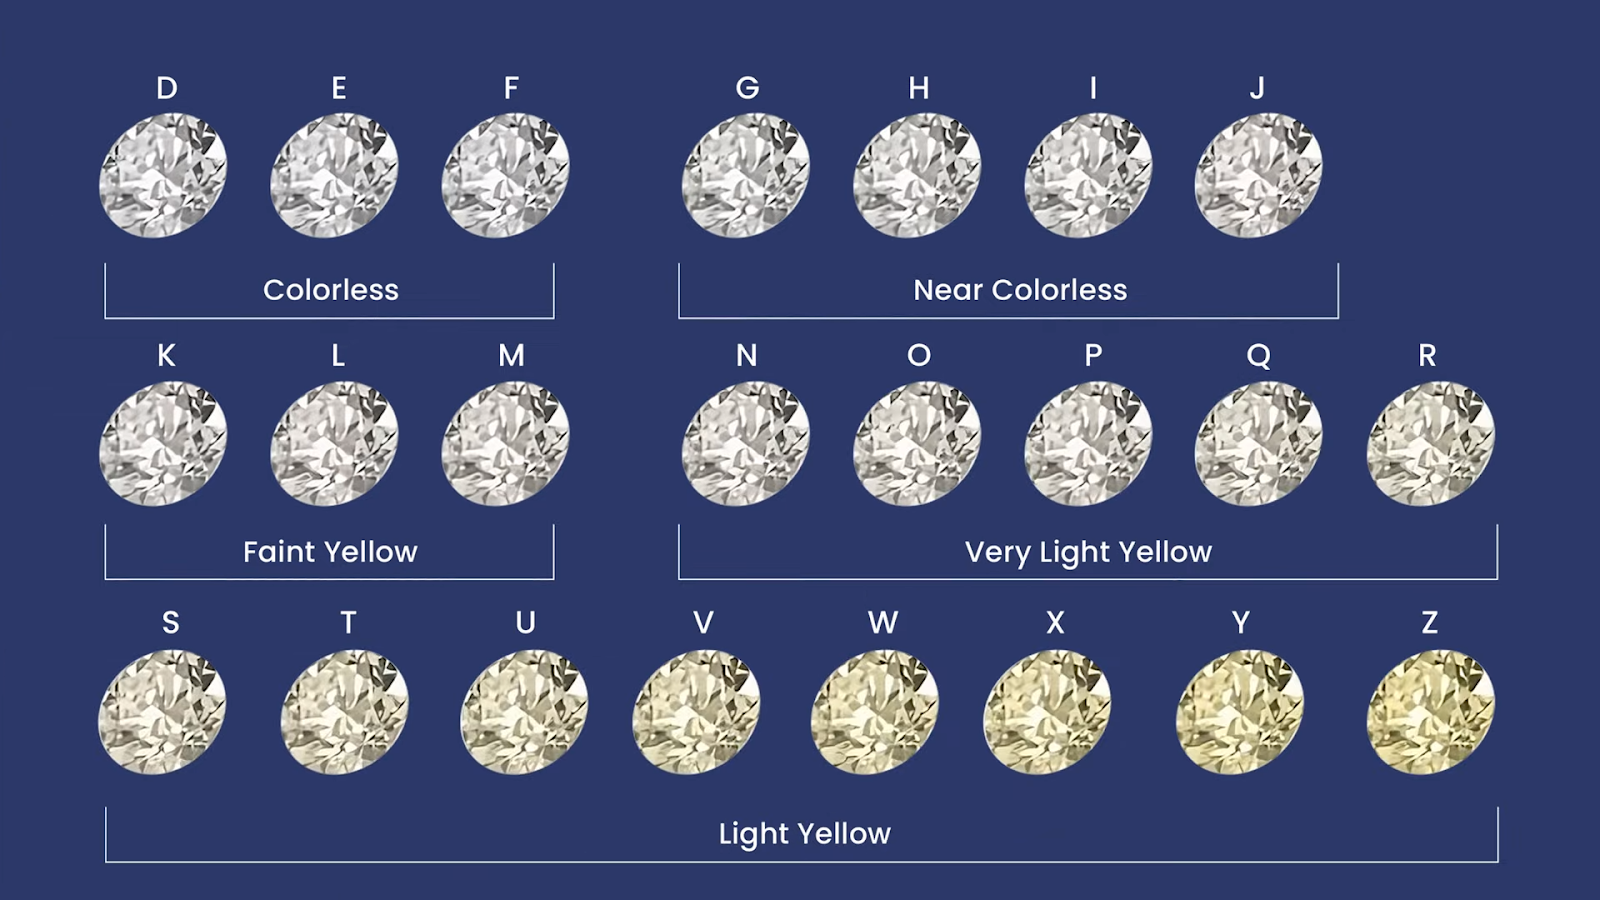 Importance of Fluorescence in Natural Diamonds